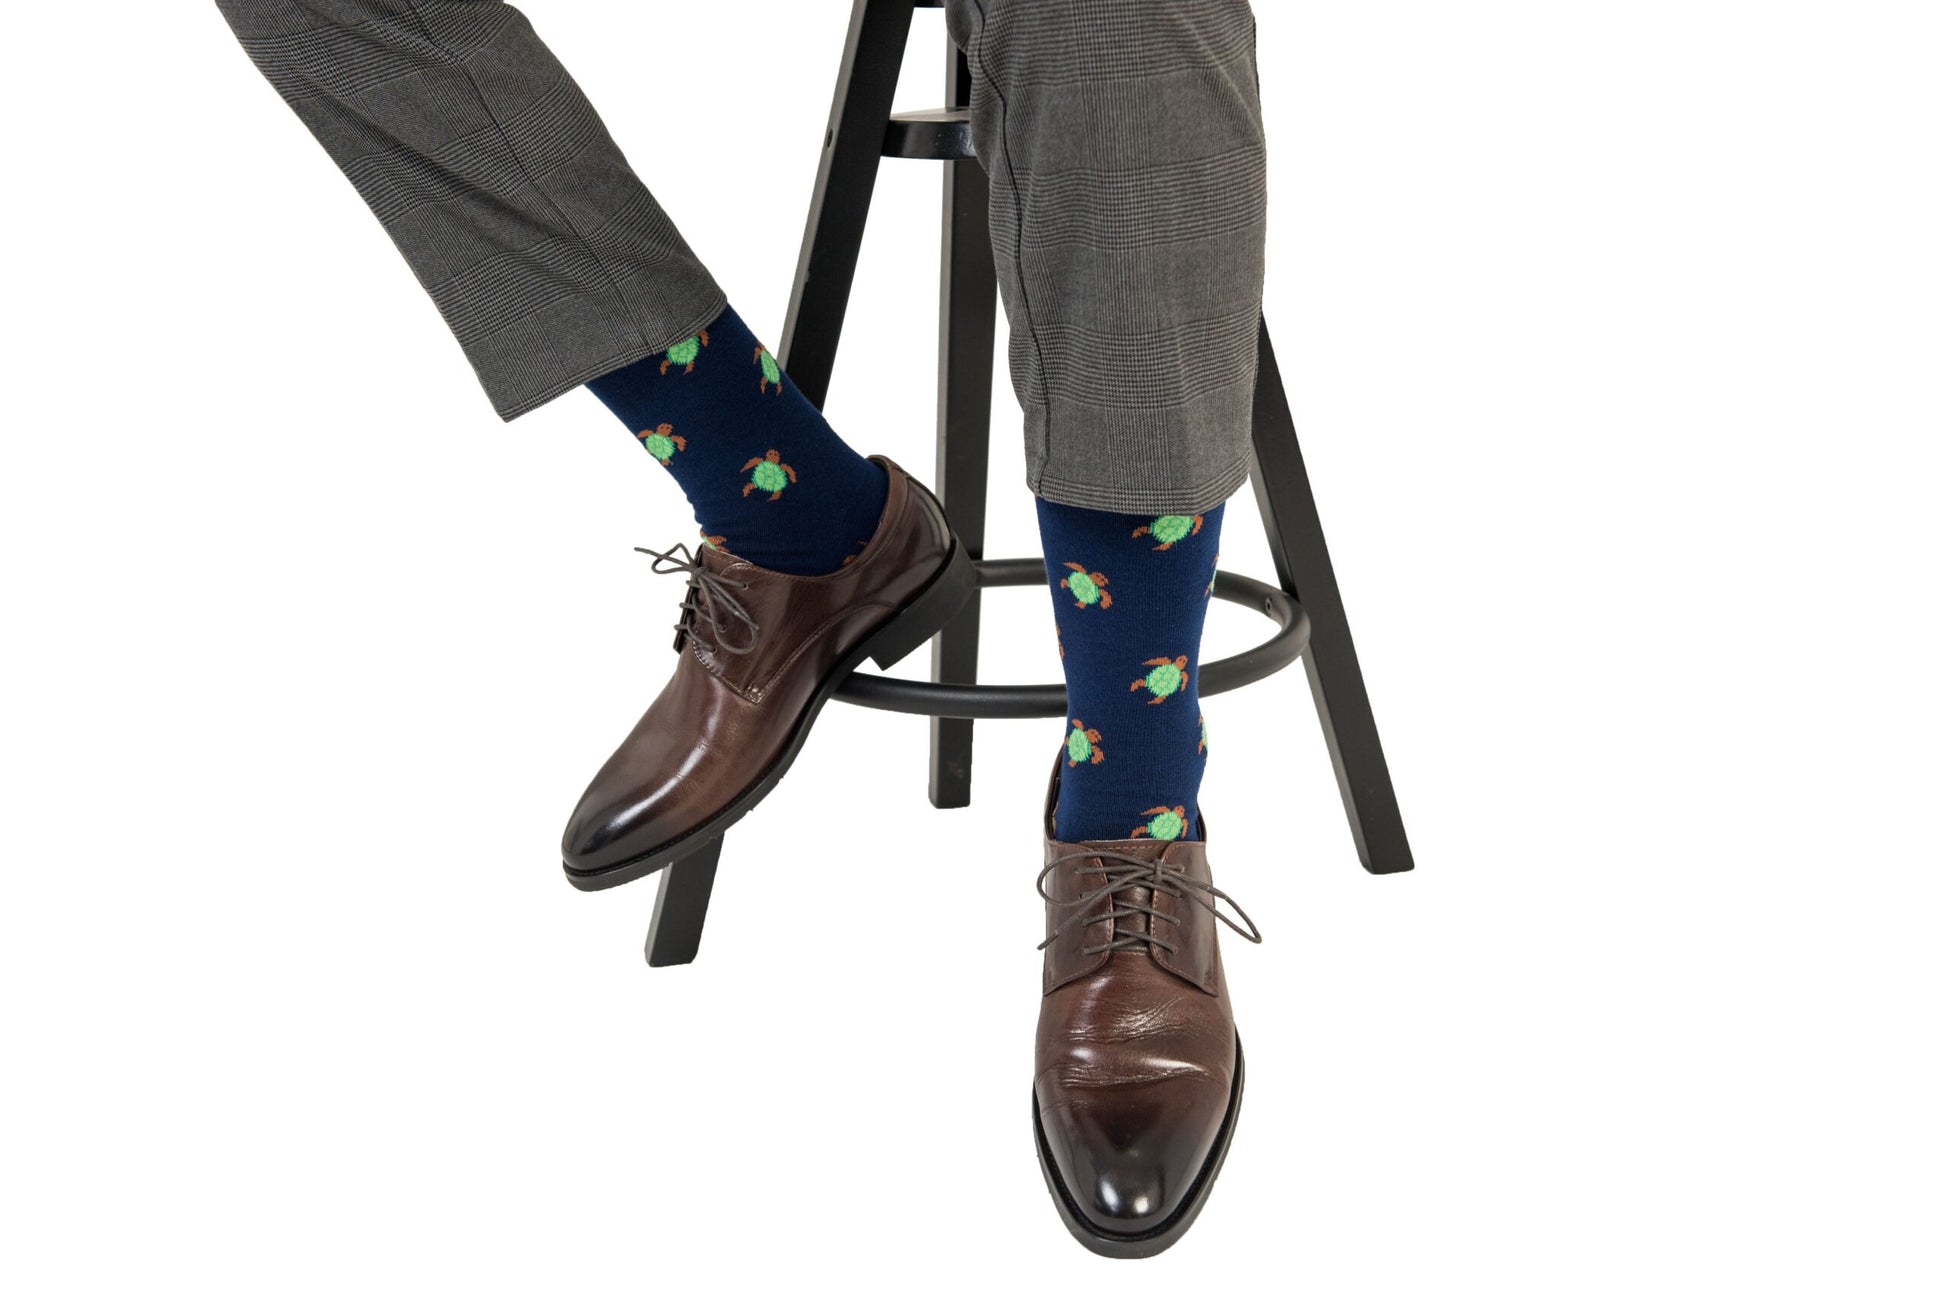 A man sitting on a stool wearing a pair of Green Turtle Socks.